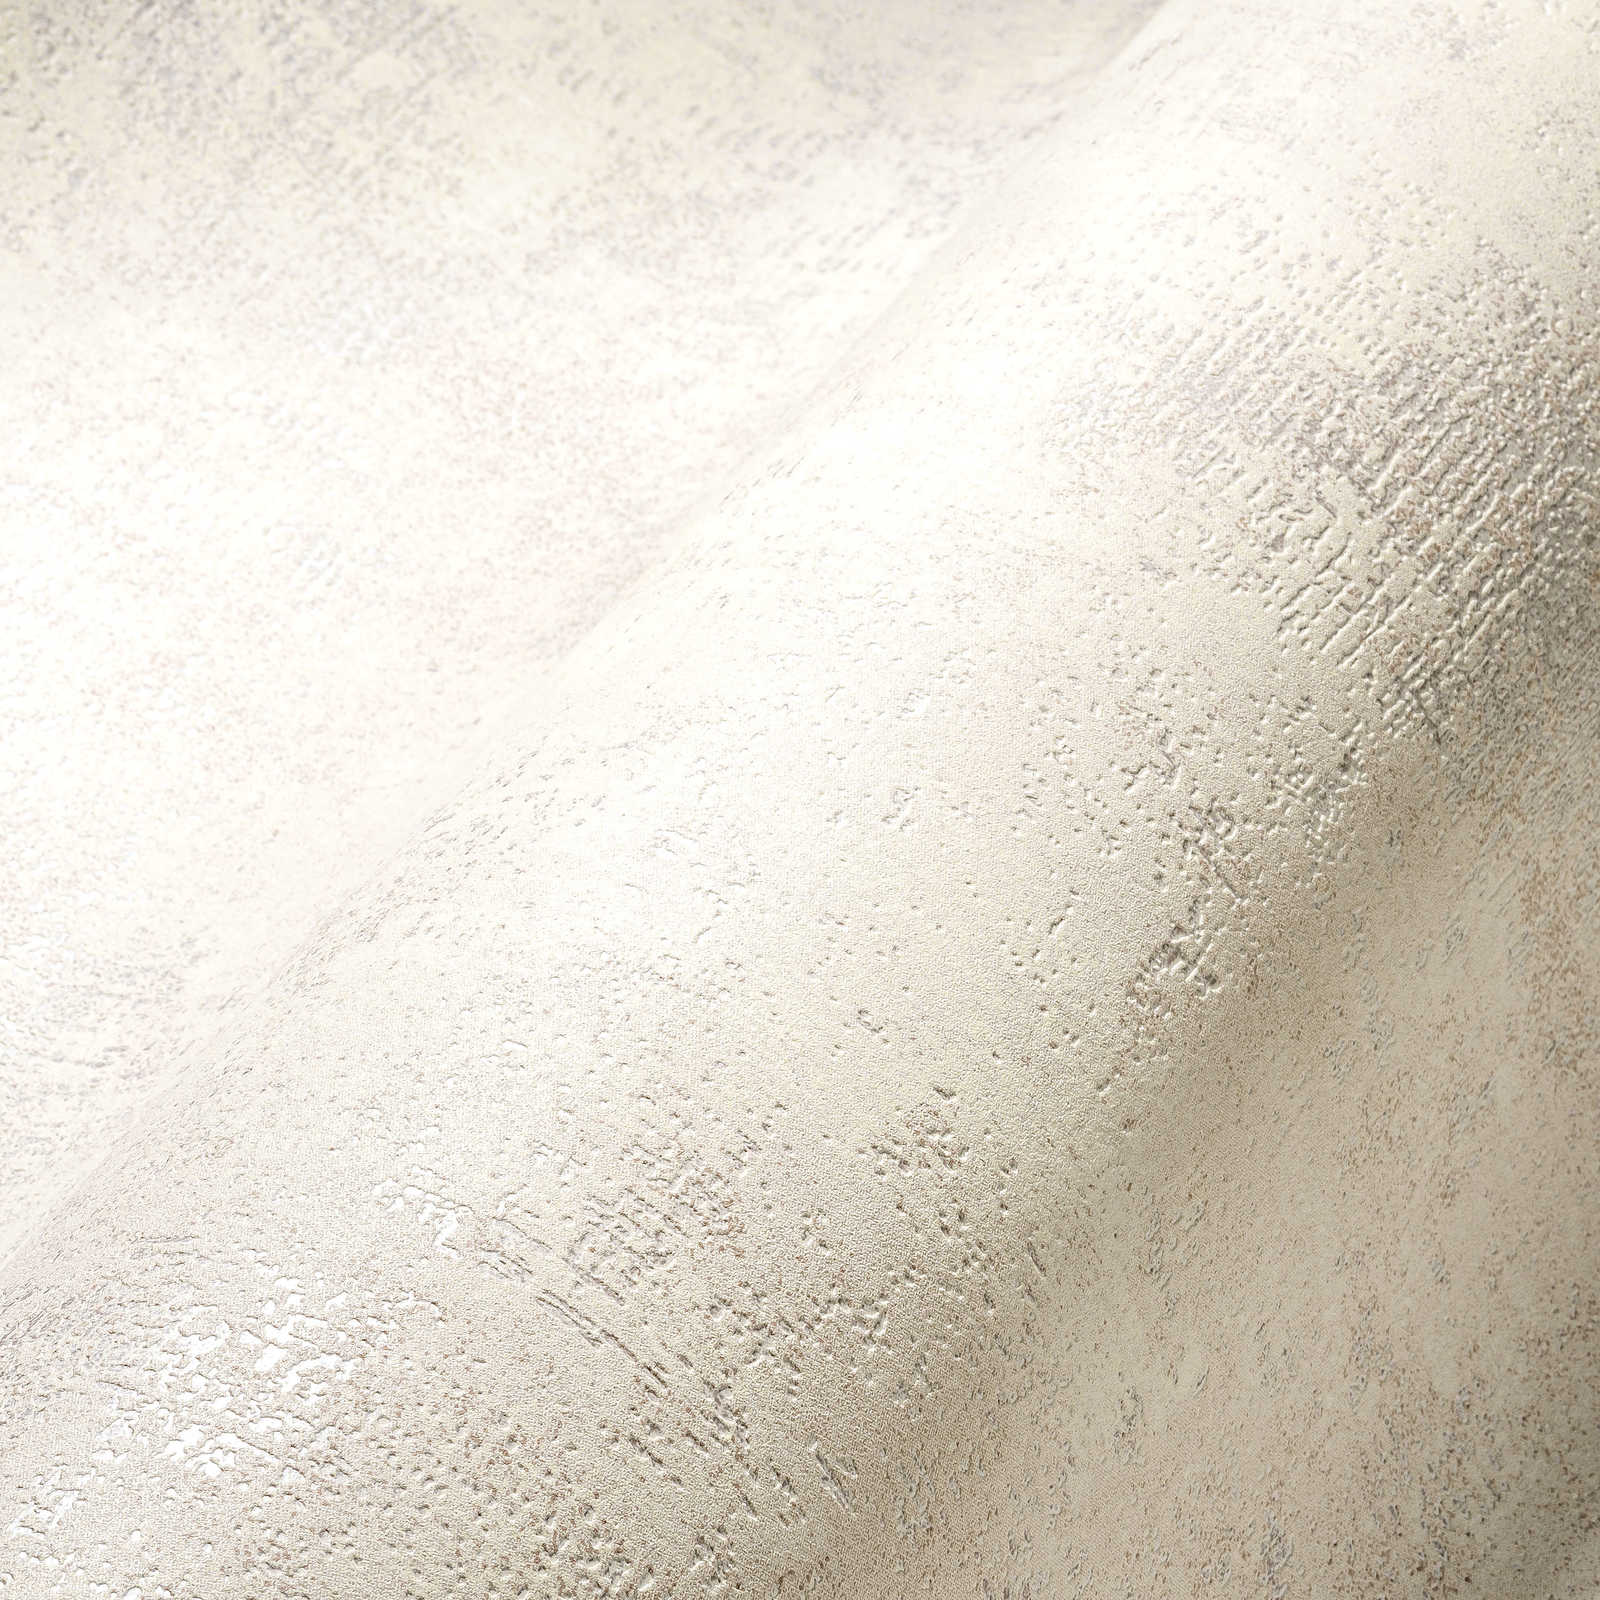             Cream non-woven wallpaper with textured pattern in plaster look
        